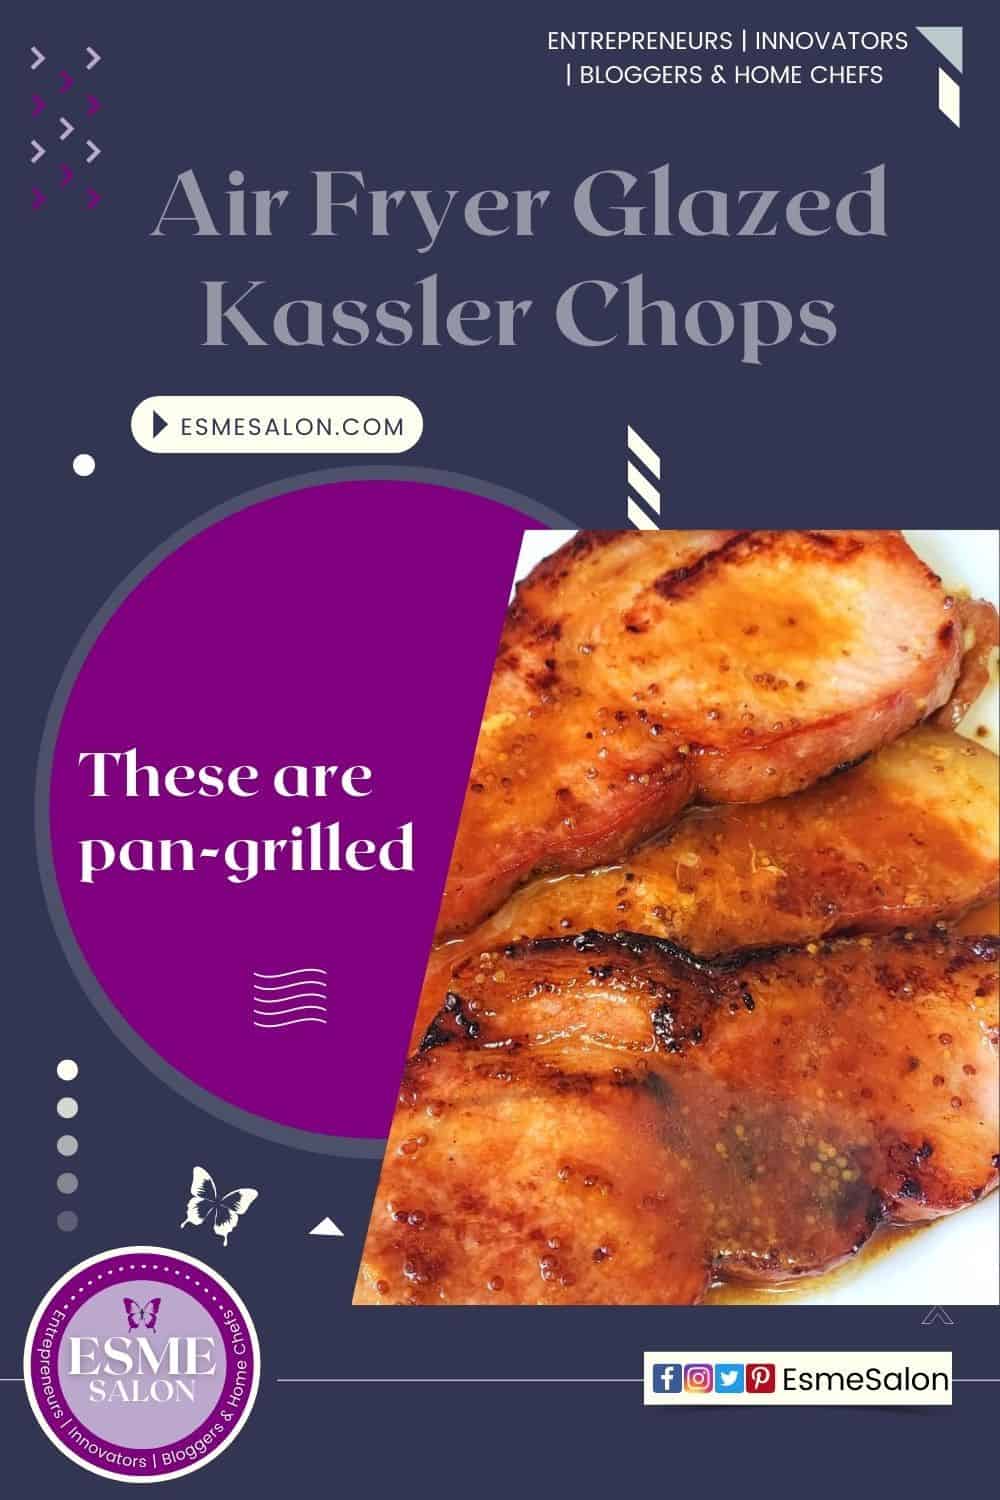 Glazed Kassler Chops these are pan-fried